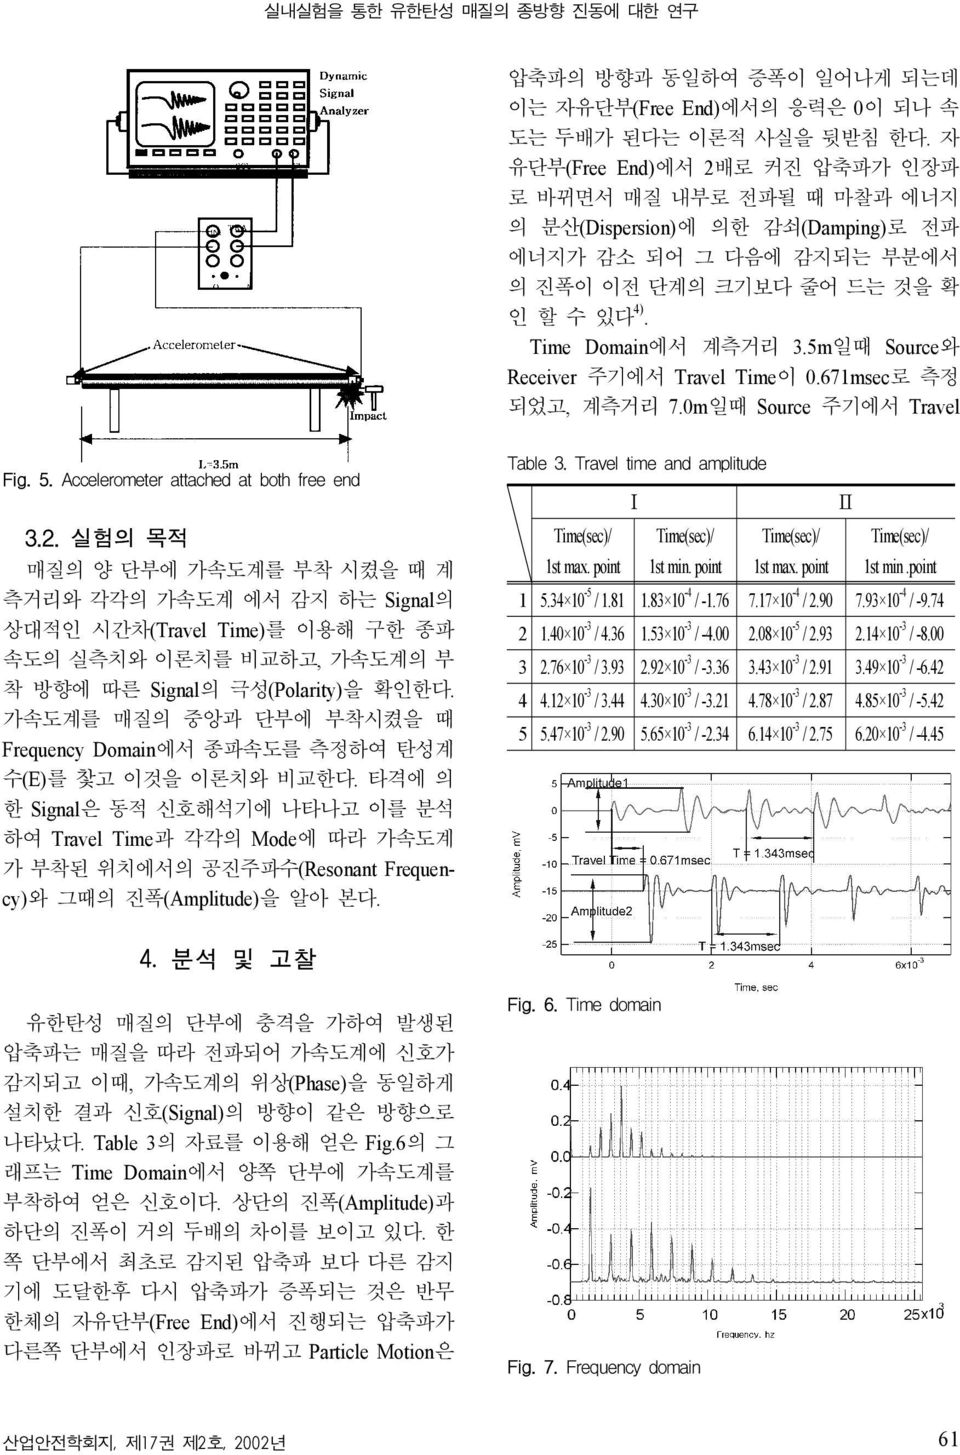 5m일때 Source와 Receiver 주기에서 Travel Time이 0.671msec로 측정 되었고, 계측거리 7.0m일때 Source 주기에서 Travel Fig. 5. Accelerometer attached at both free end 3.2.